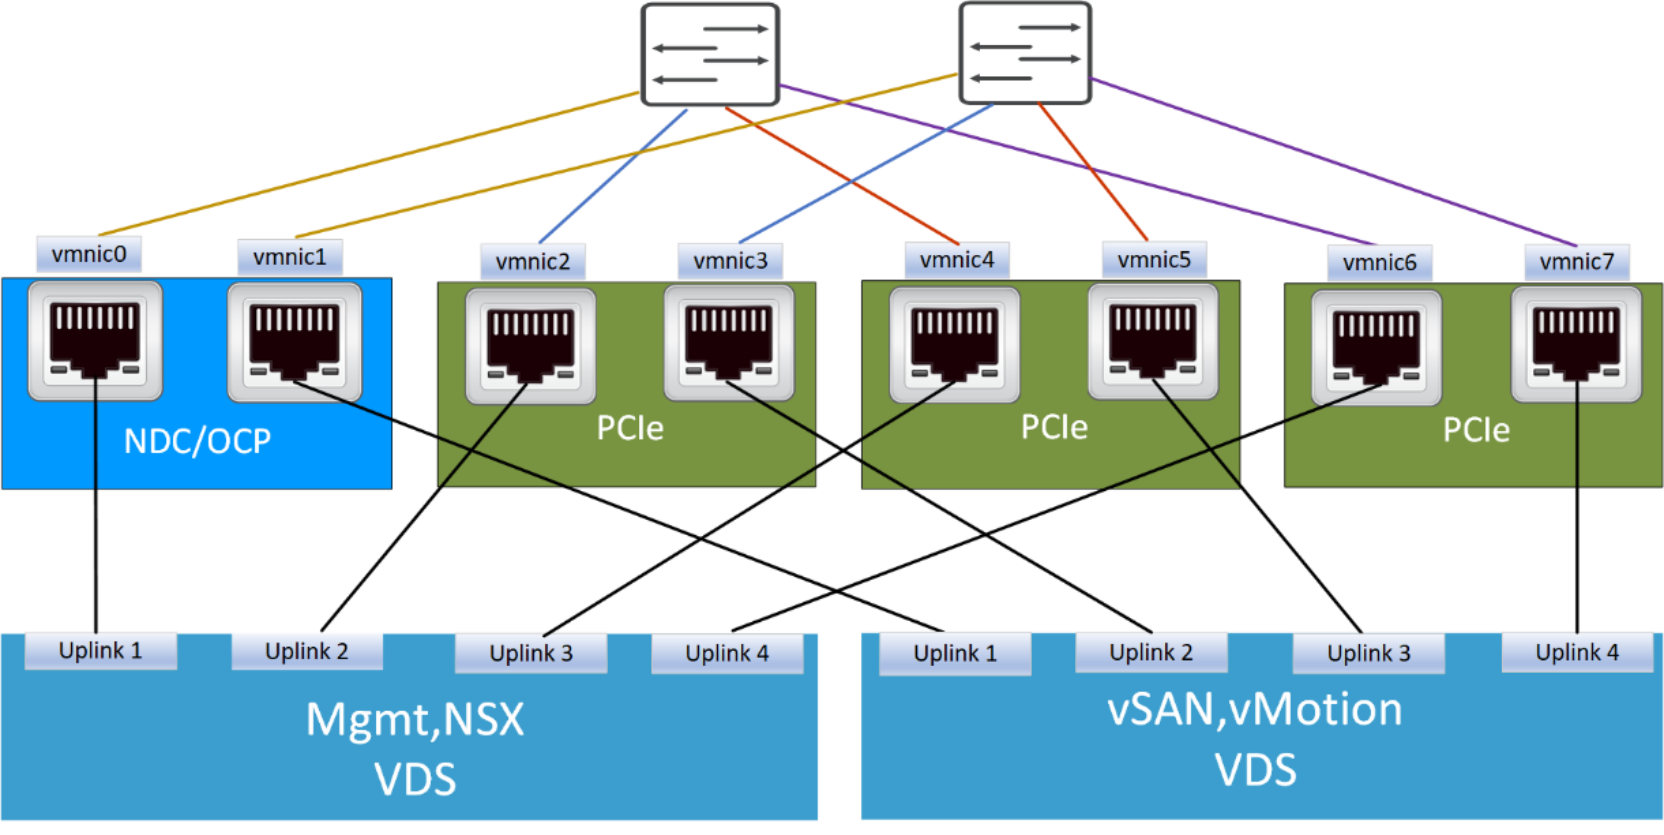 This picture shows connectivity options for VxRail nodes with 8 NICs and 2 VDSs.